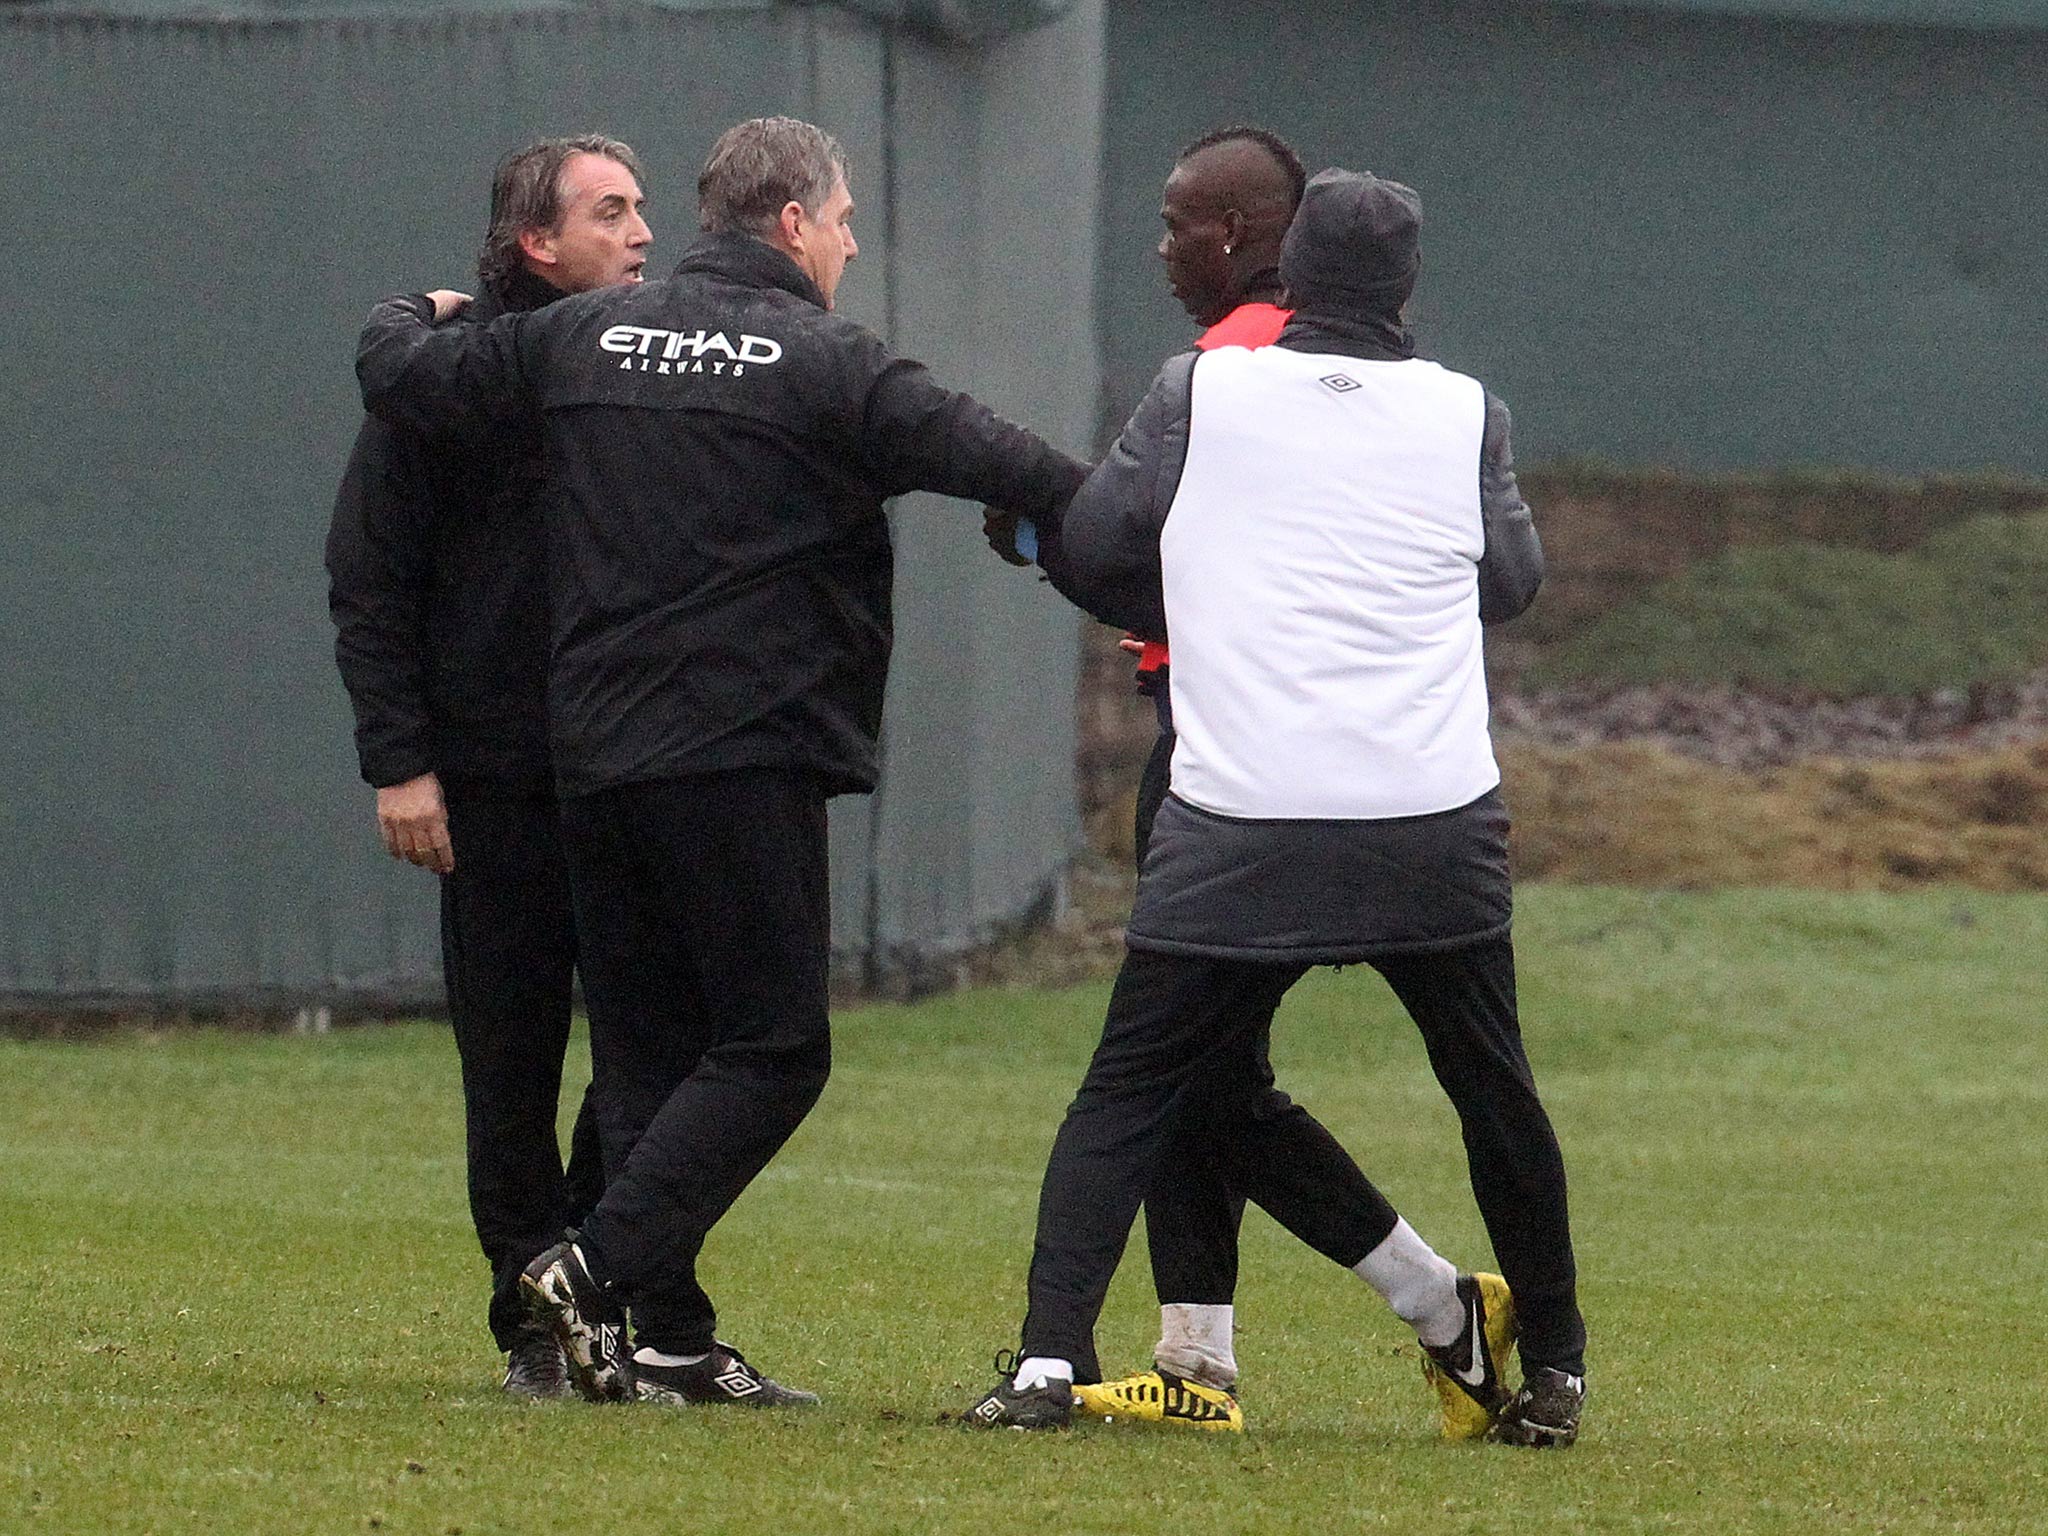 Roberto Mancini and Mario Balotelli are separated in an incident during his last Premier League spell